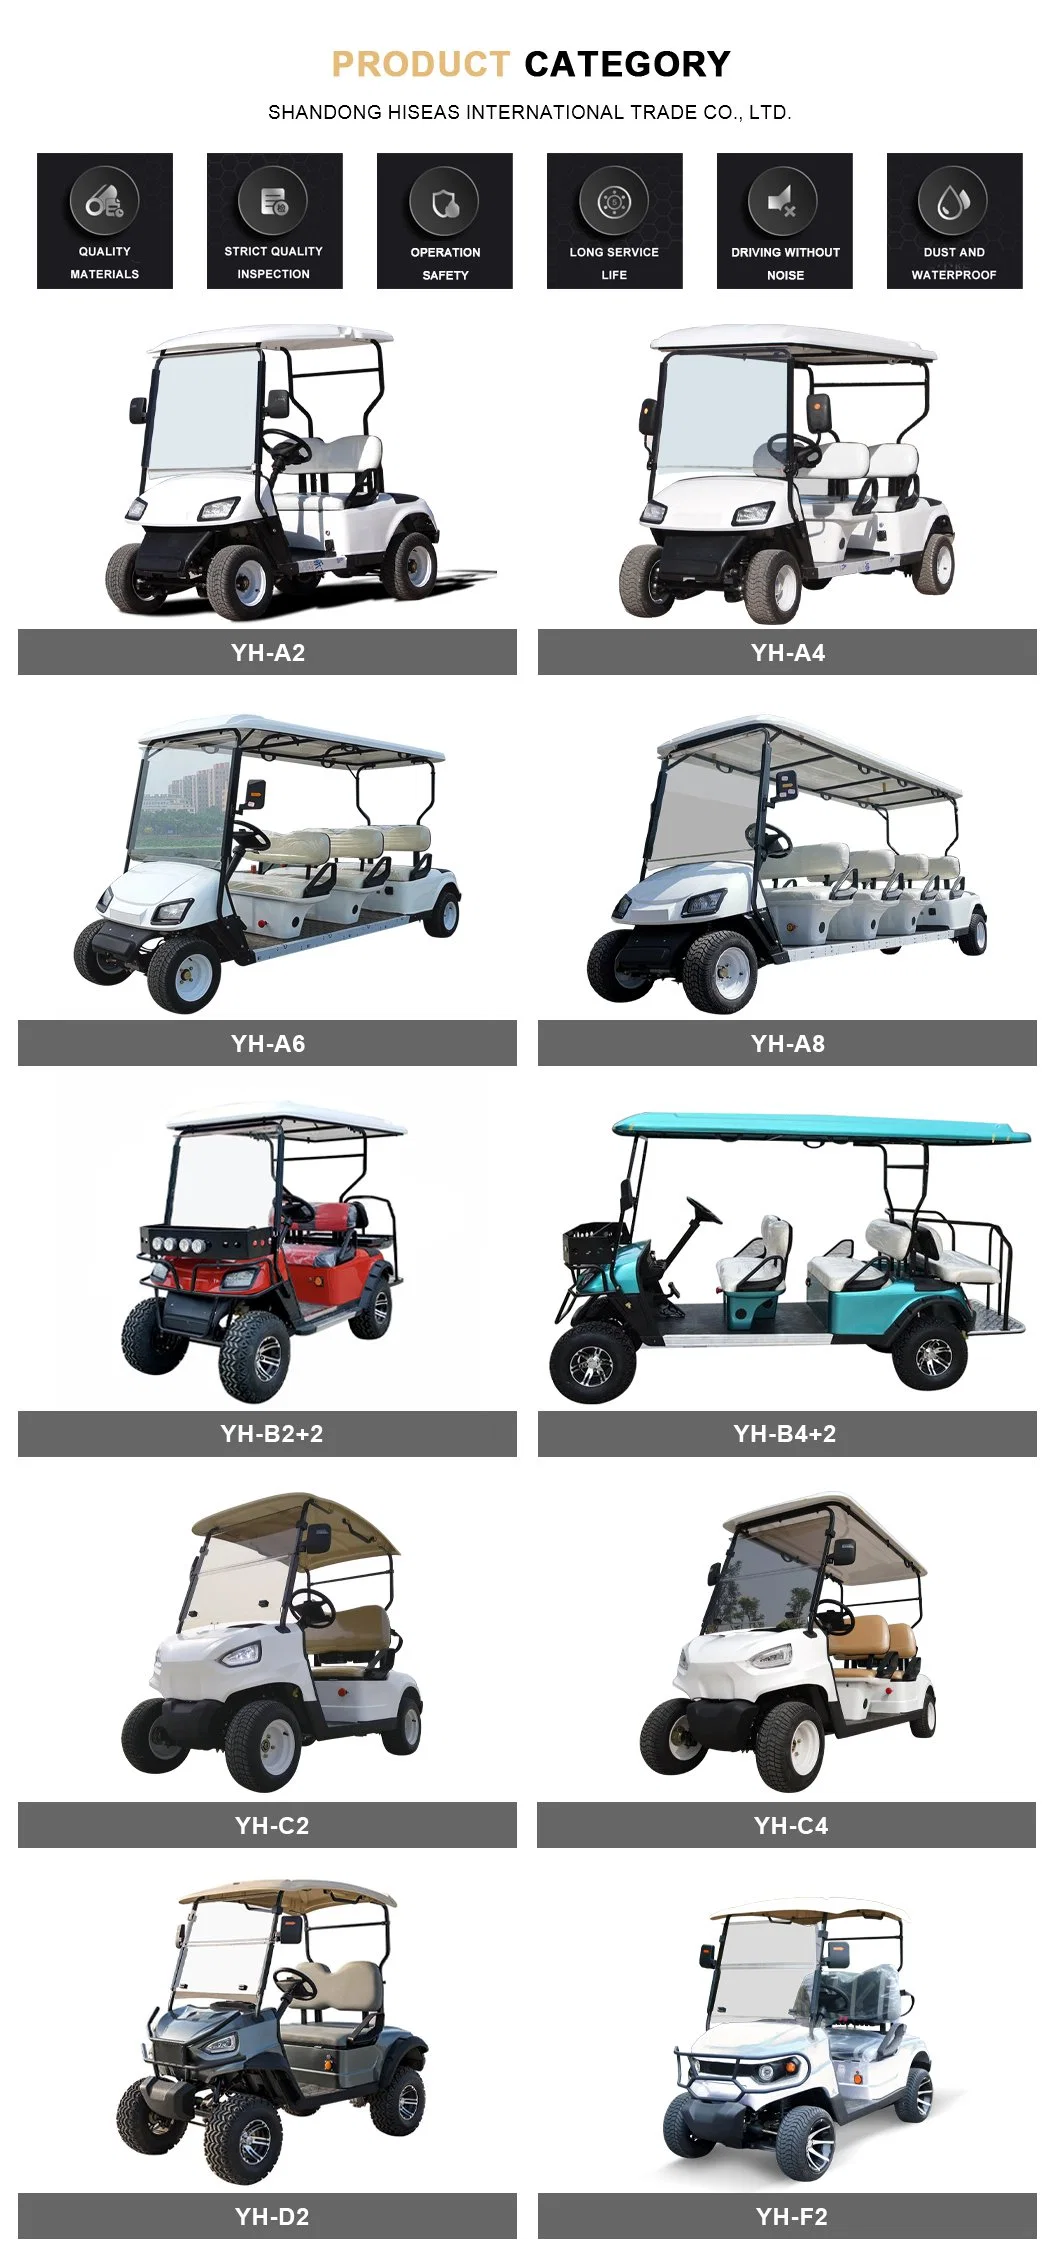 Low Price New The Future of Golfing Club Lead Acid/Lithium Battery 48V/60V/72V 2, 4, 6, 8, 10 Seats/Seater Huntin Massive Rim Tires off Road Electric Golf Carts